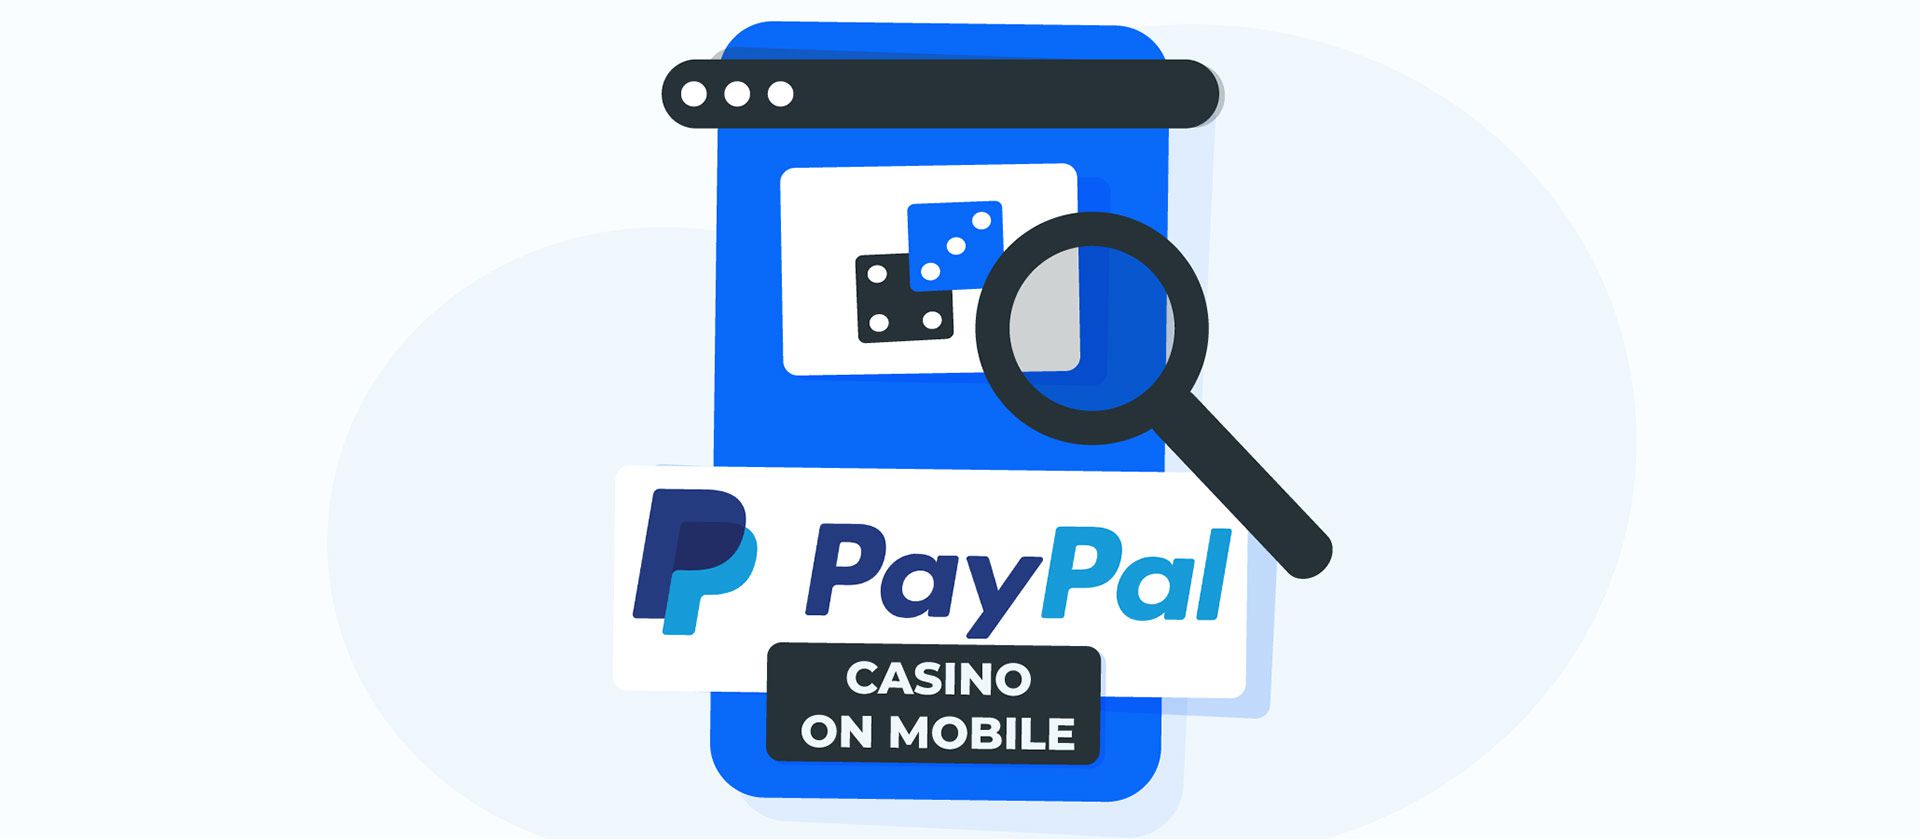 Mobile PayPal casinos in Canada.